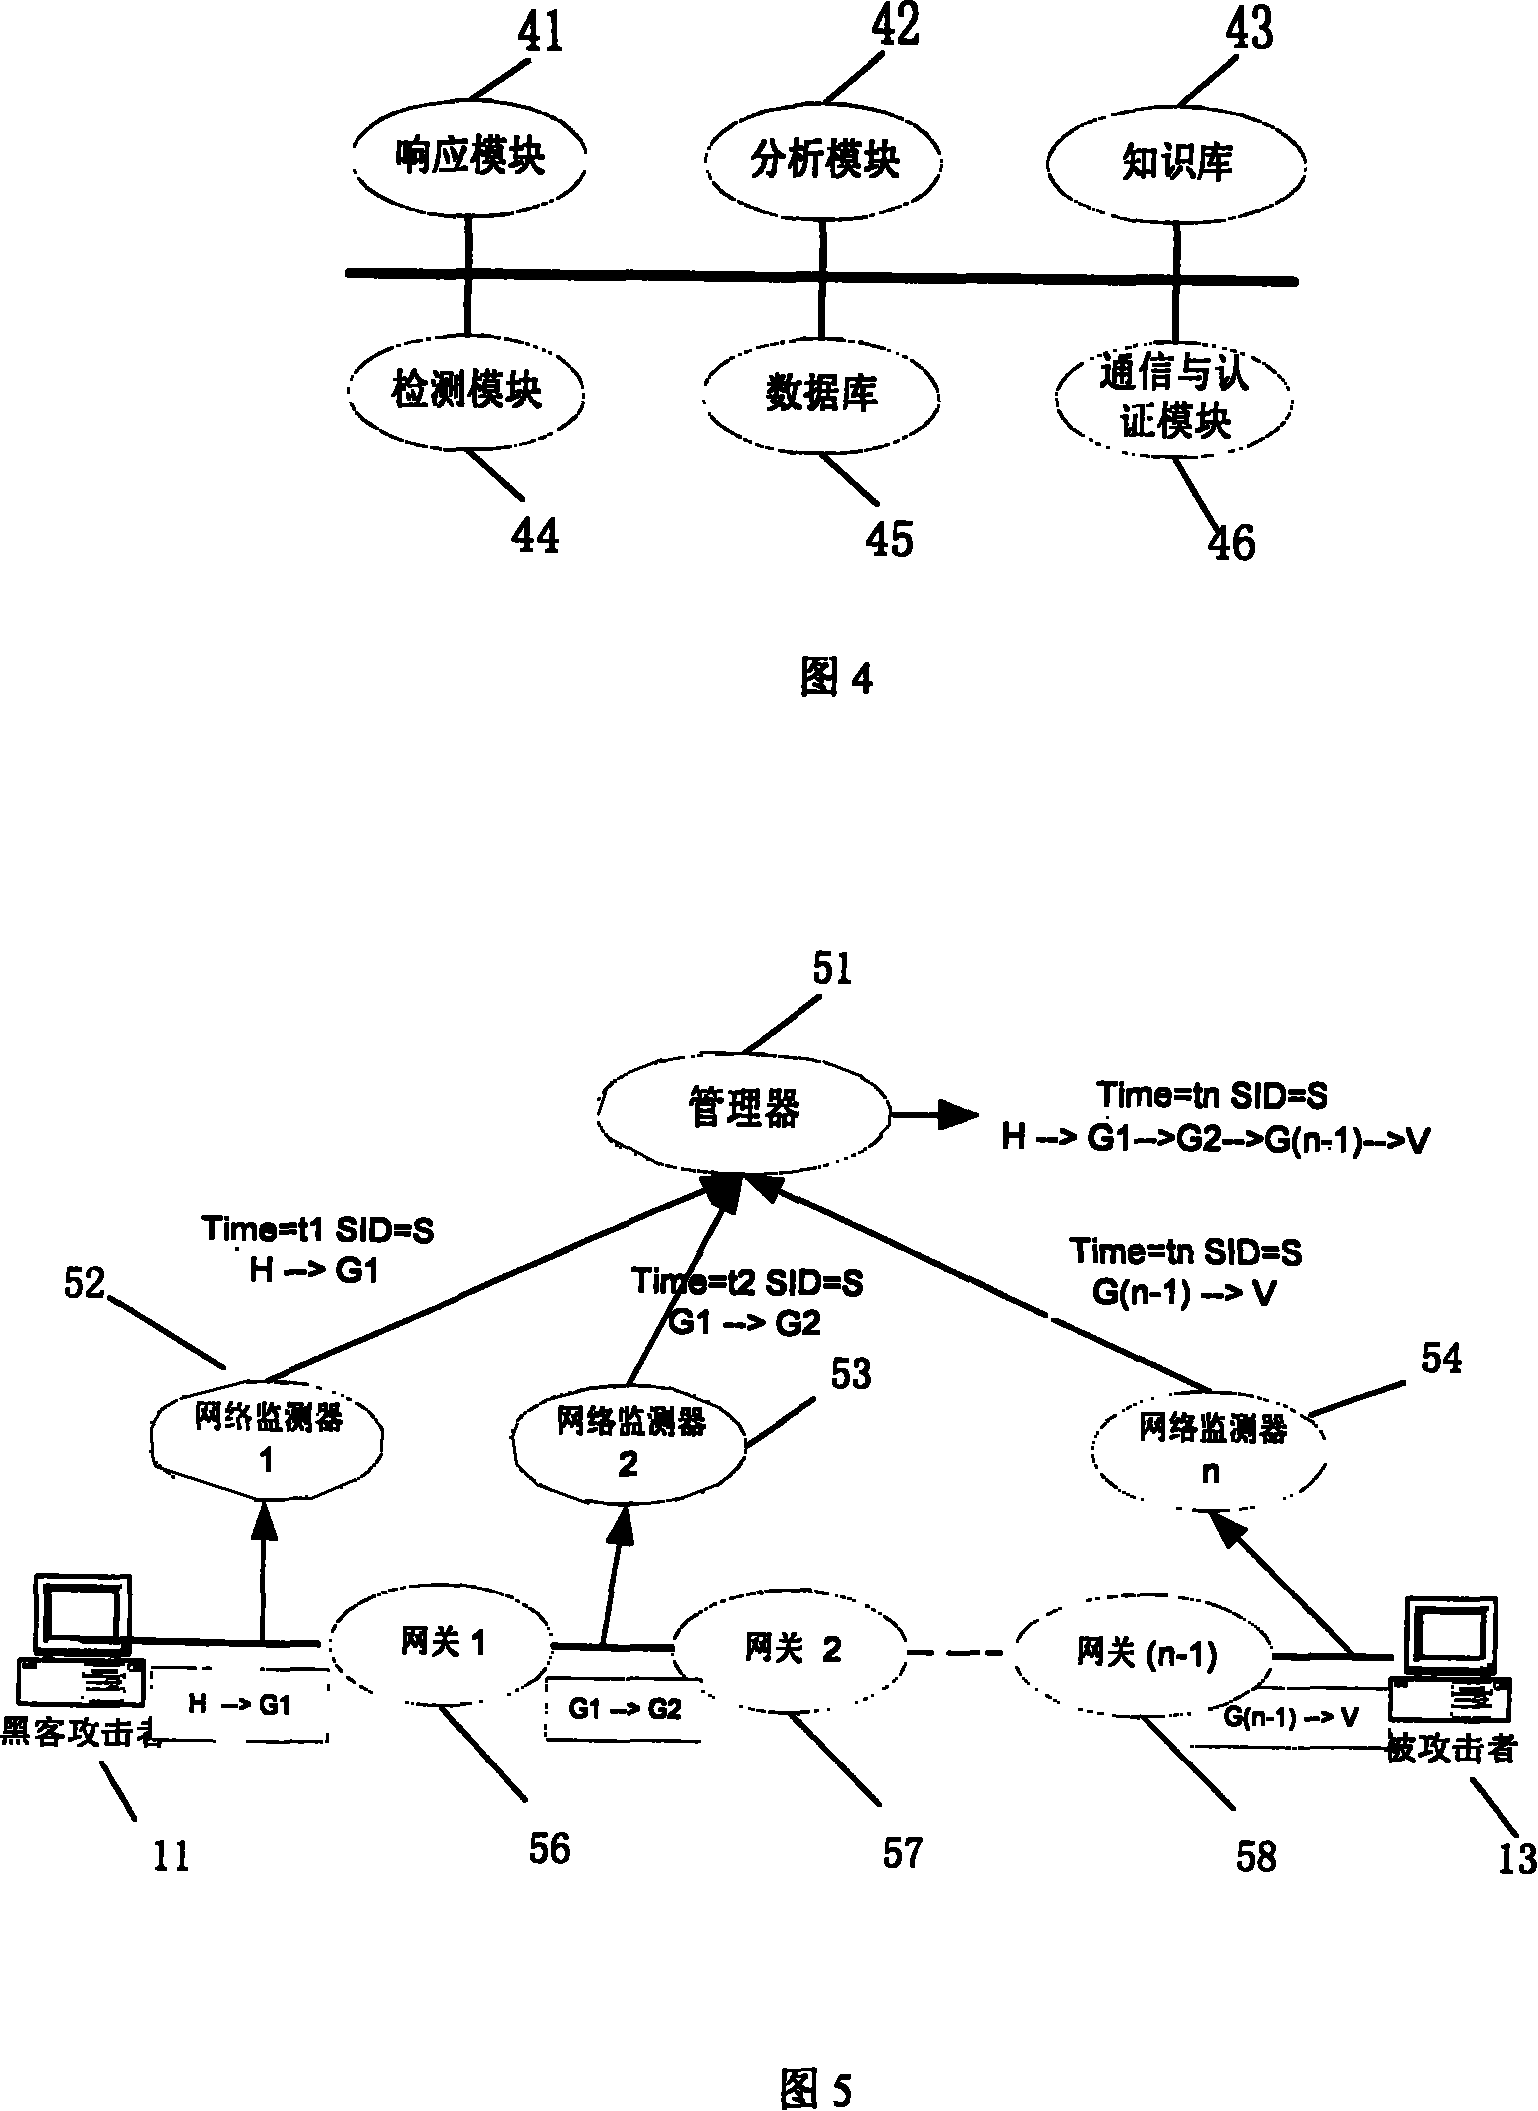 Distributed hacker tracking system in controllable computer network